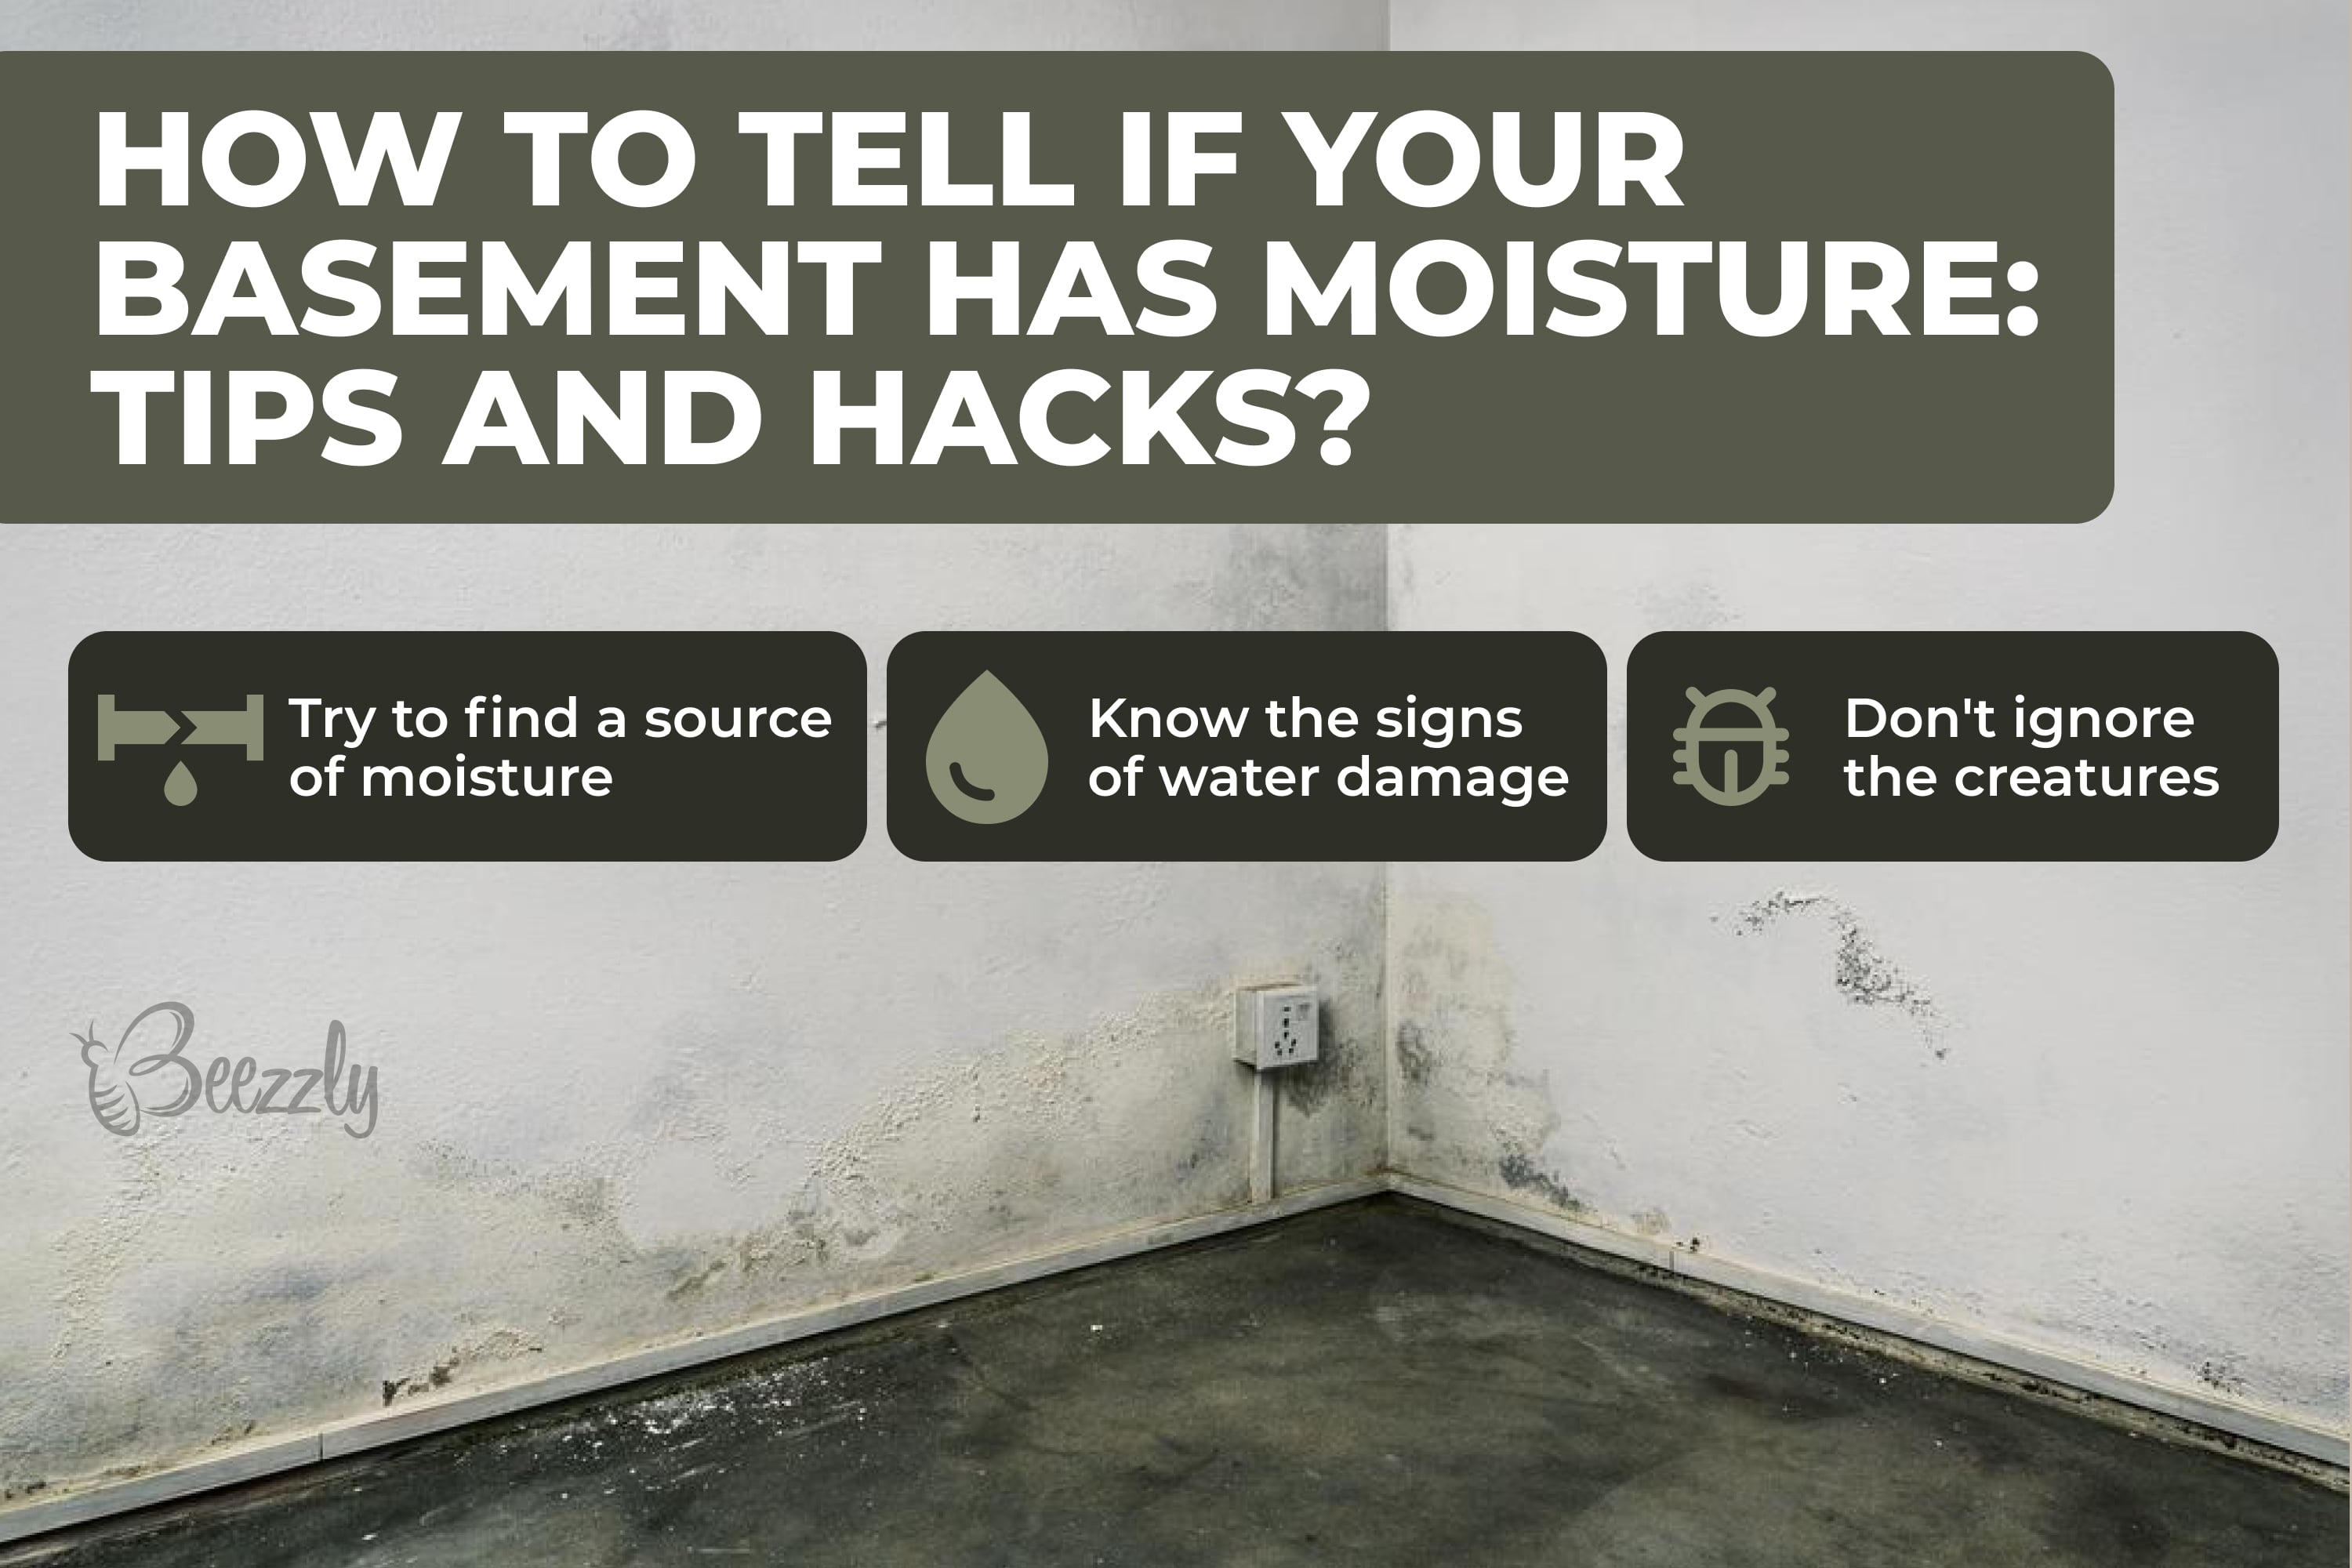 How to tell if your basement has moisture. Tips and hacks